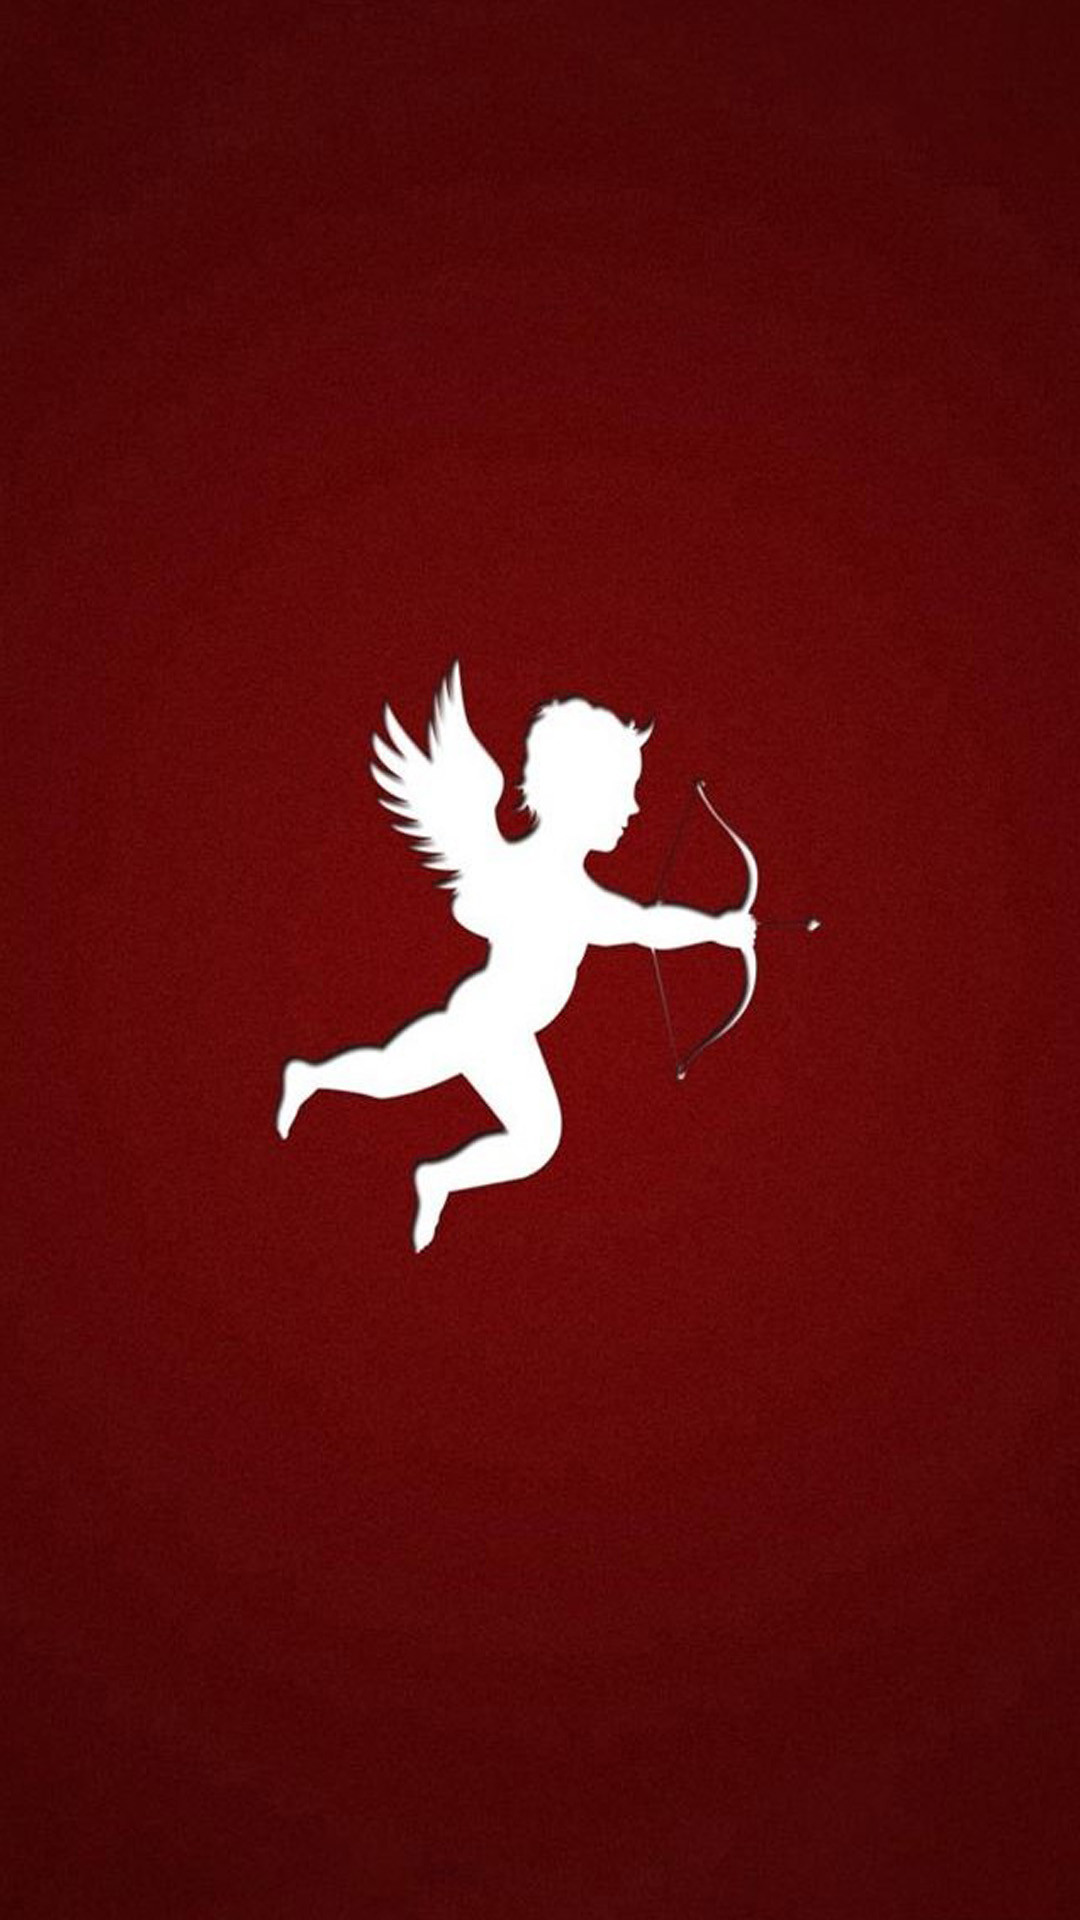 1080x1920 Simple The Arrow Of Cupid Outline Art iPhone 8 wallpaper